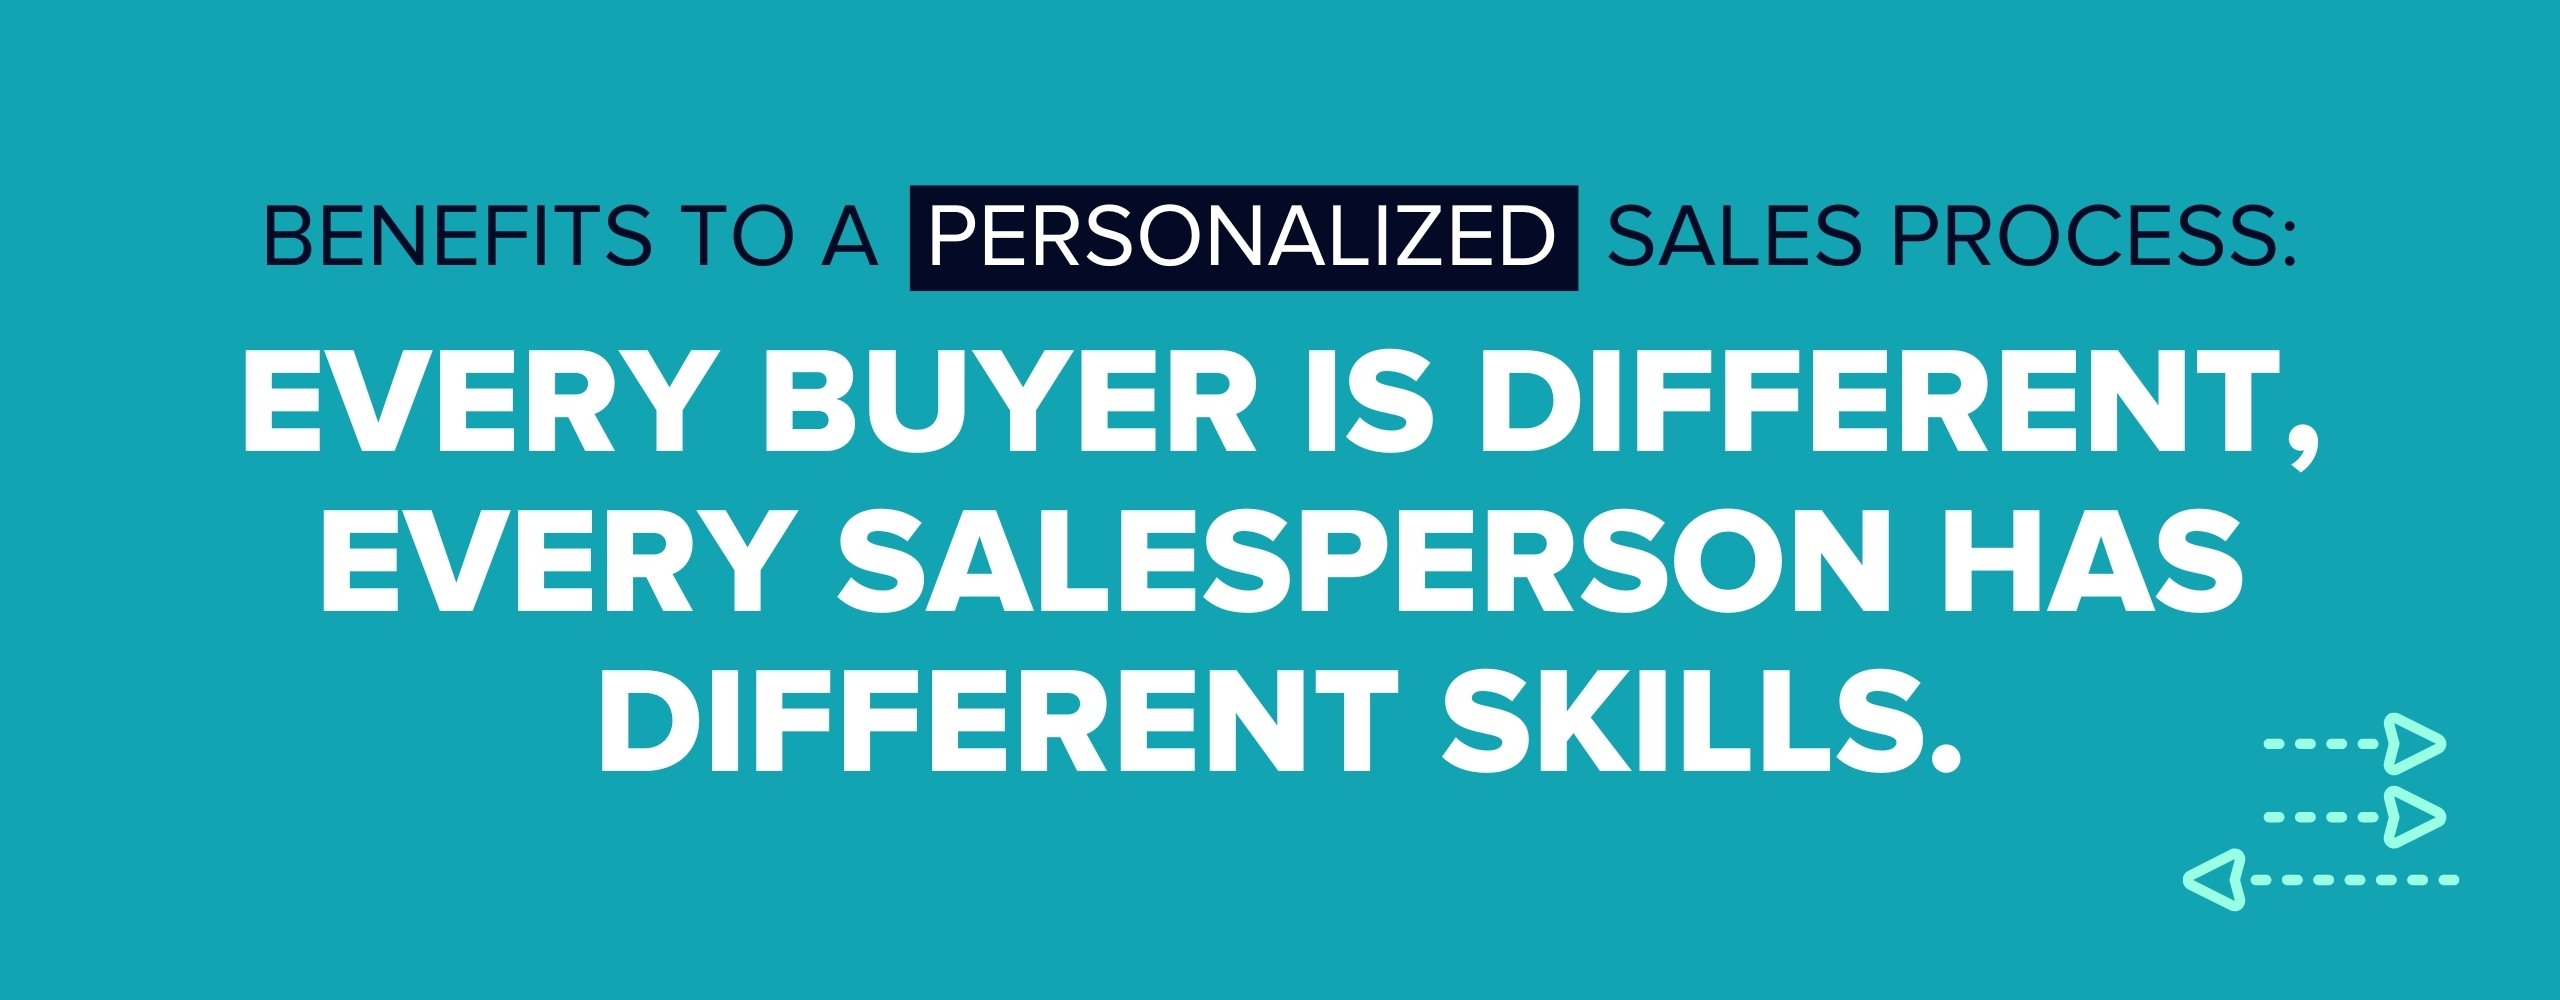 personalized-sales-process